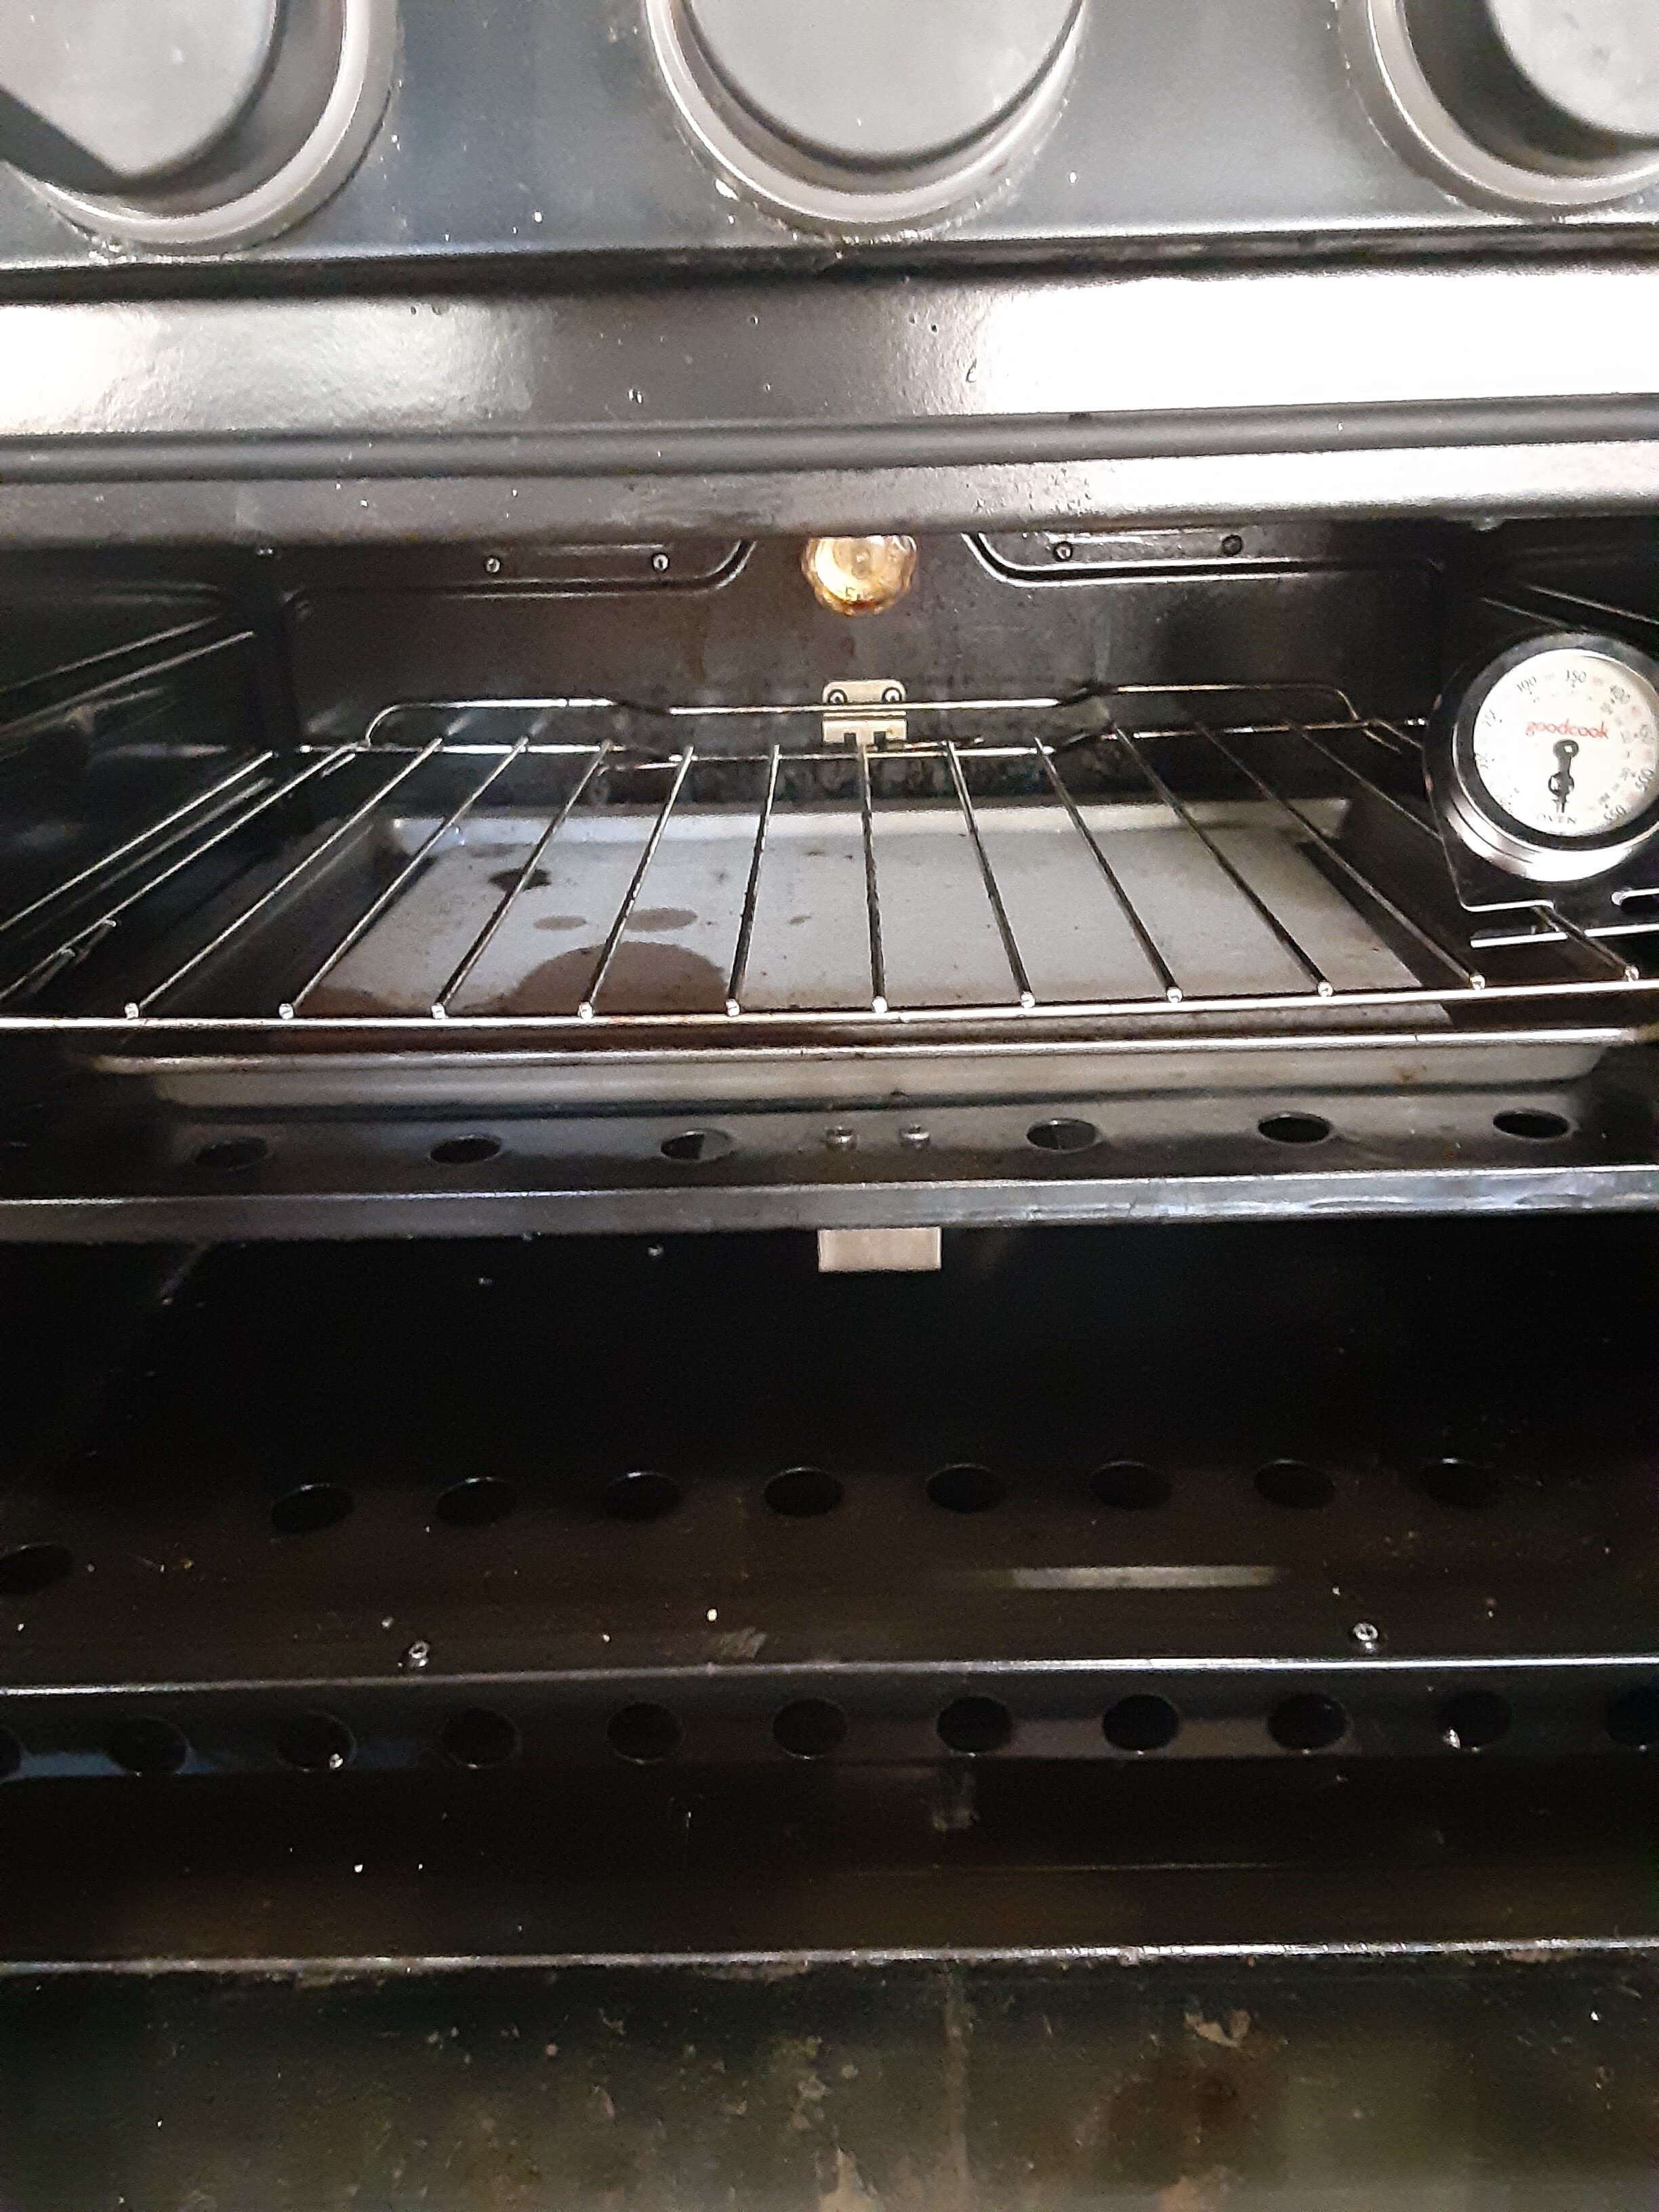 3 of My Top Tips for Using a RV Oven, Without Burning Your Food